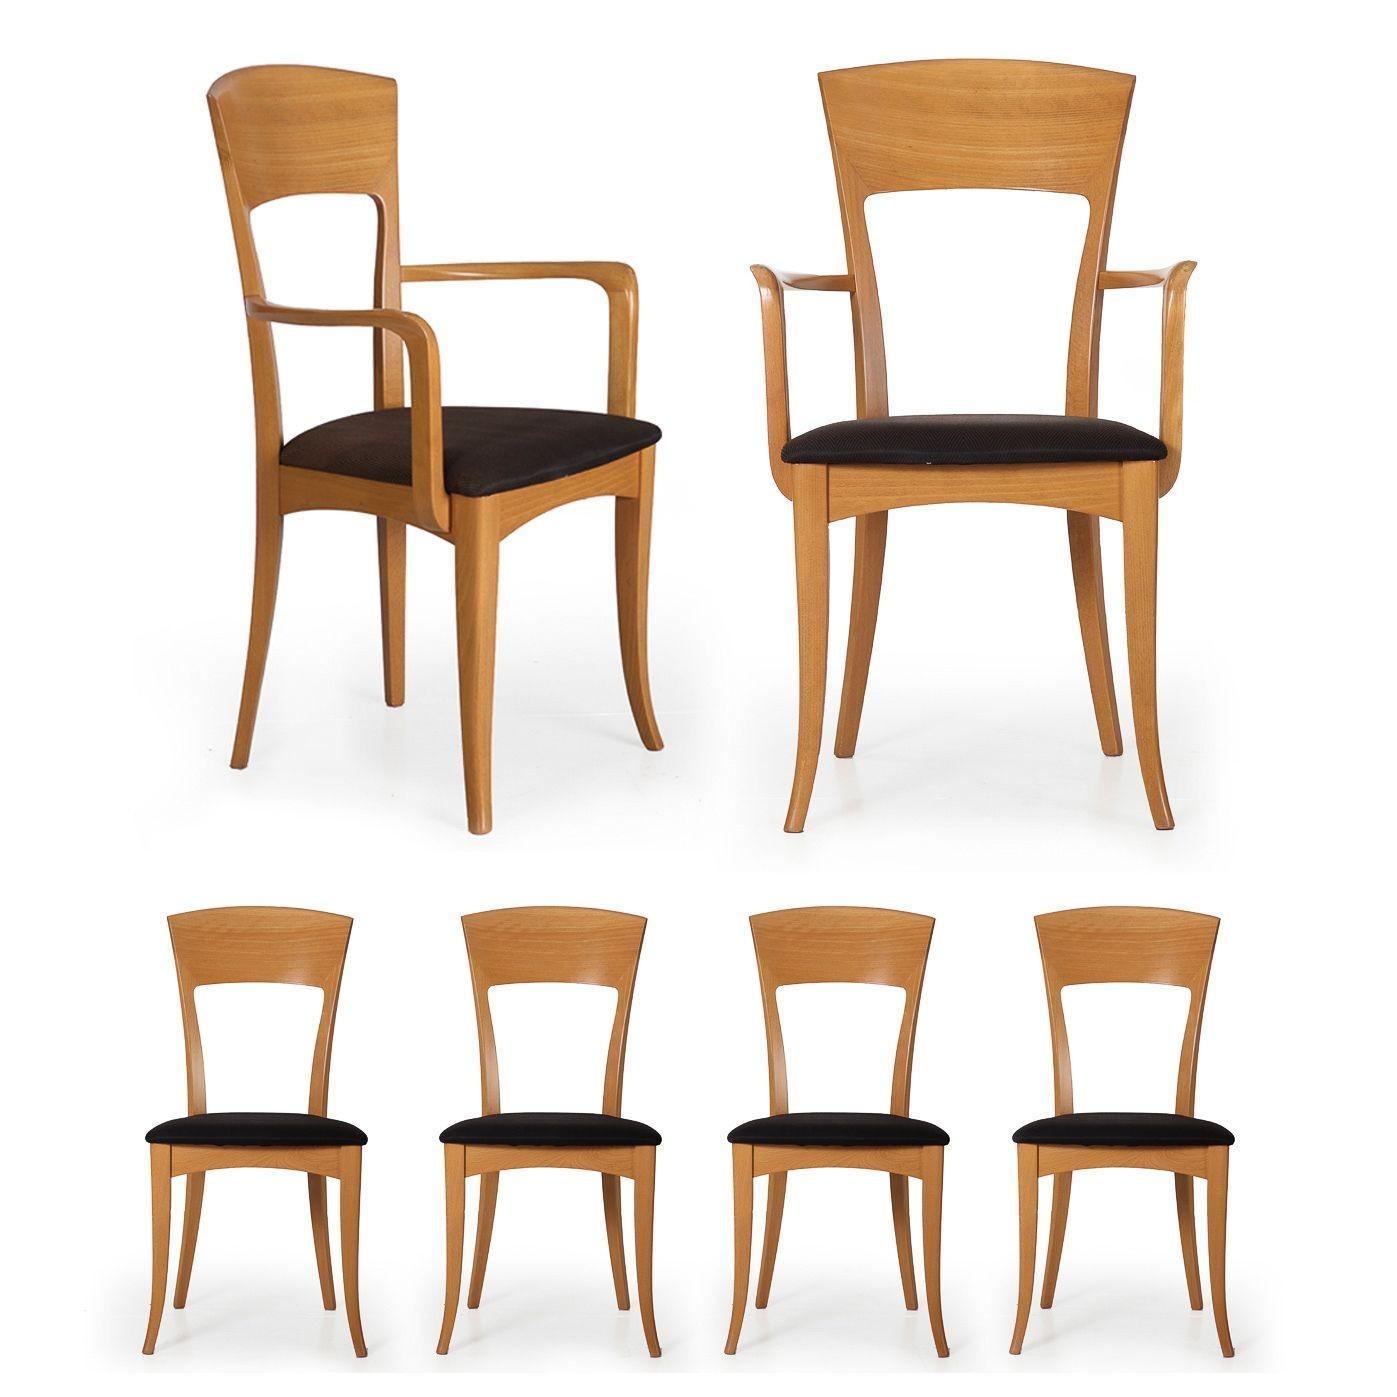 A very sleek set of six vintage dining chairs by the Northeastern Italy family furniture design firm of Antonio Sibau, they feature delicate lines with sleek profiles. The crests and conforming stiles have a lovely inward curve, the arms with a